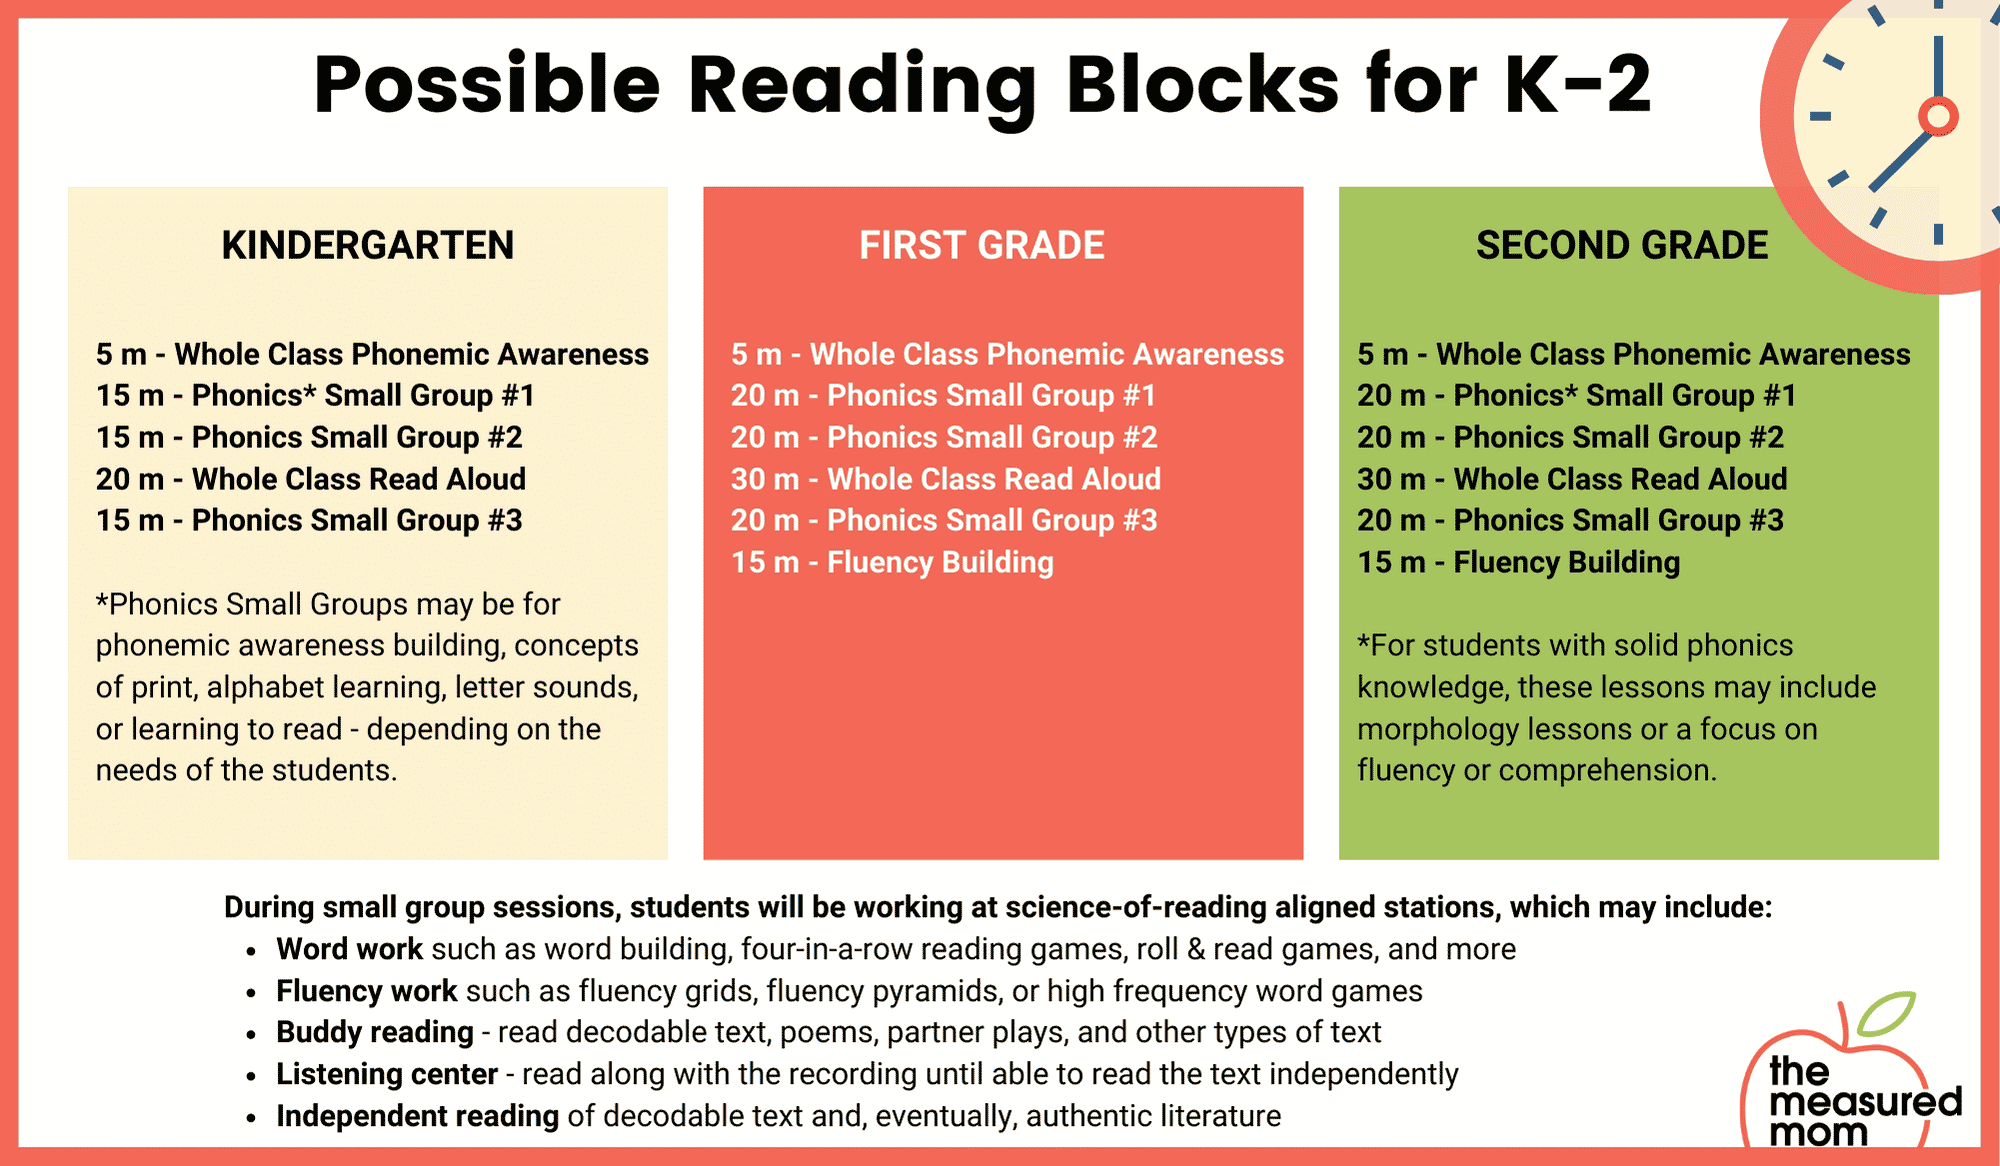 How to teach reading comprehension in K-2 - The Measured Mom